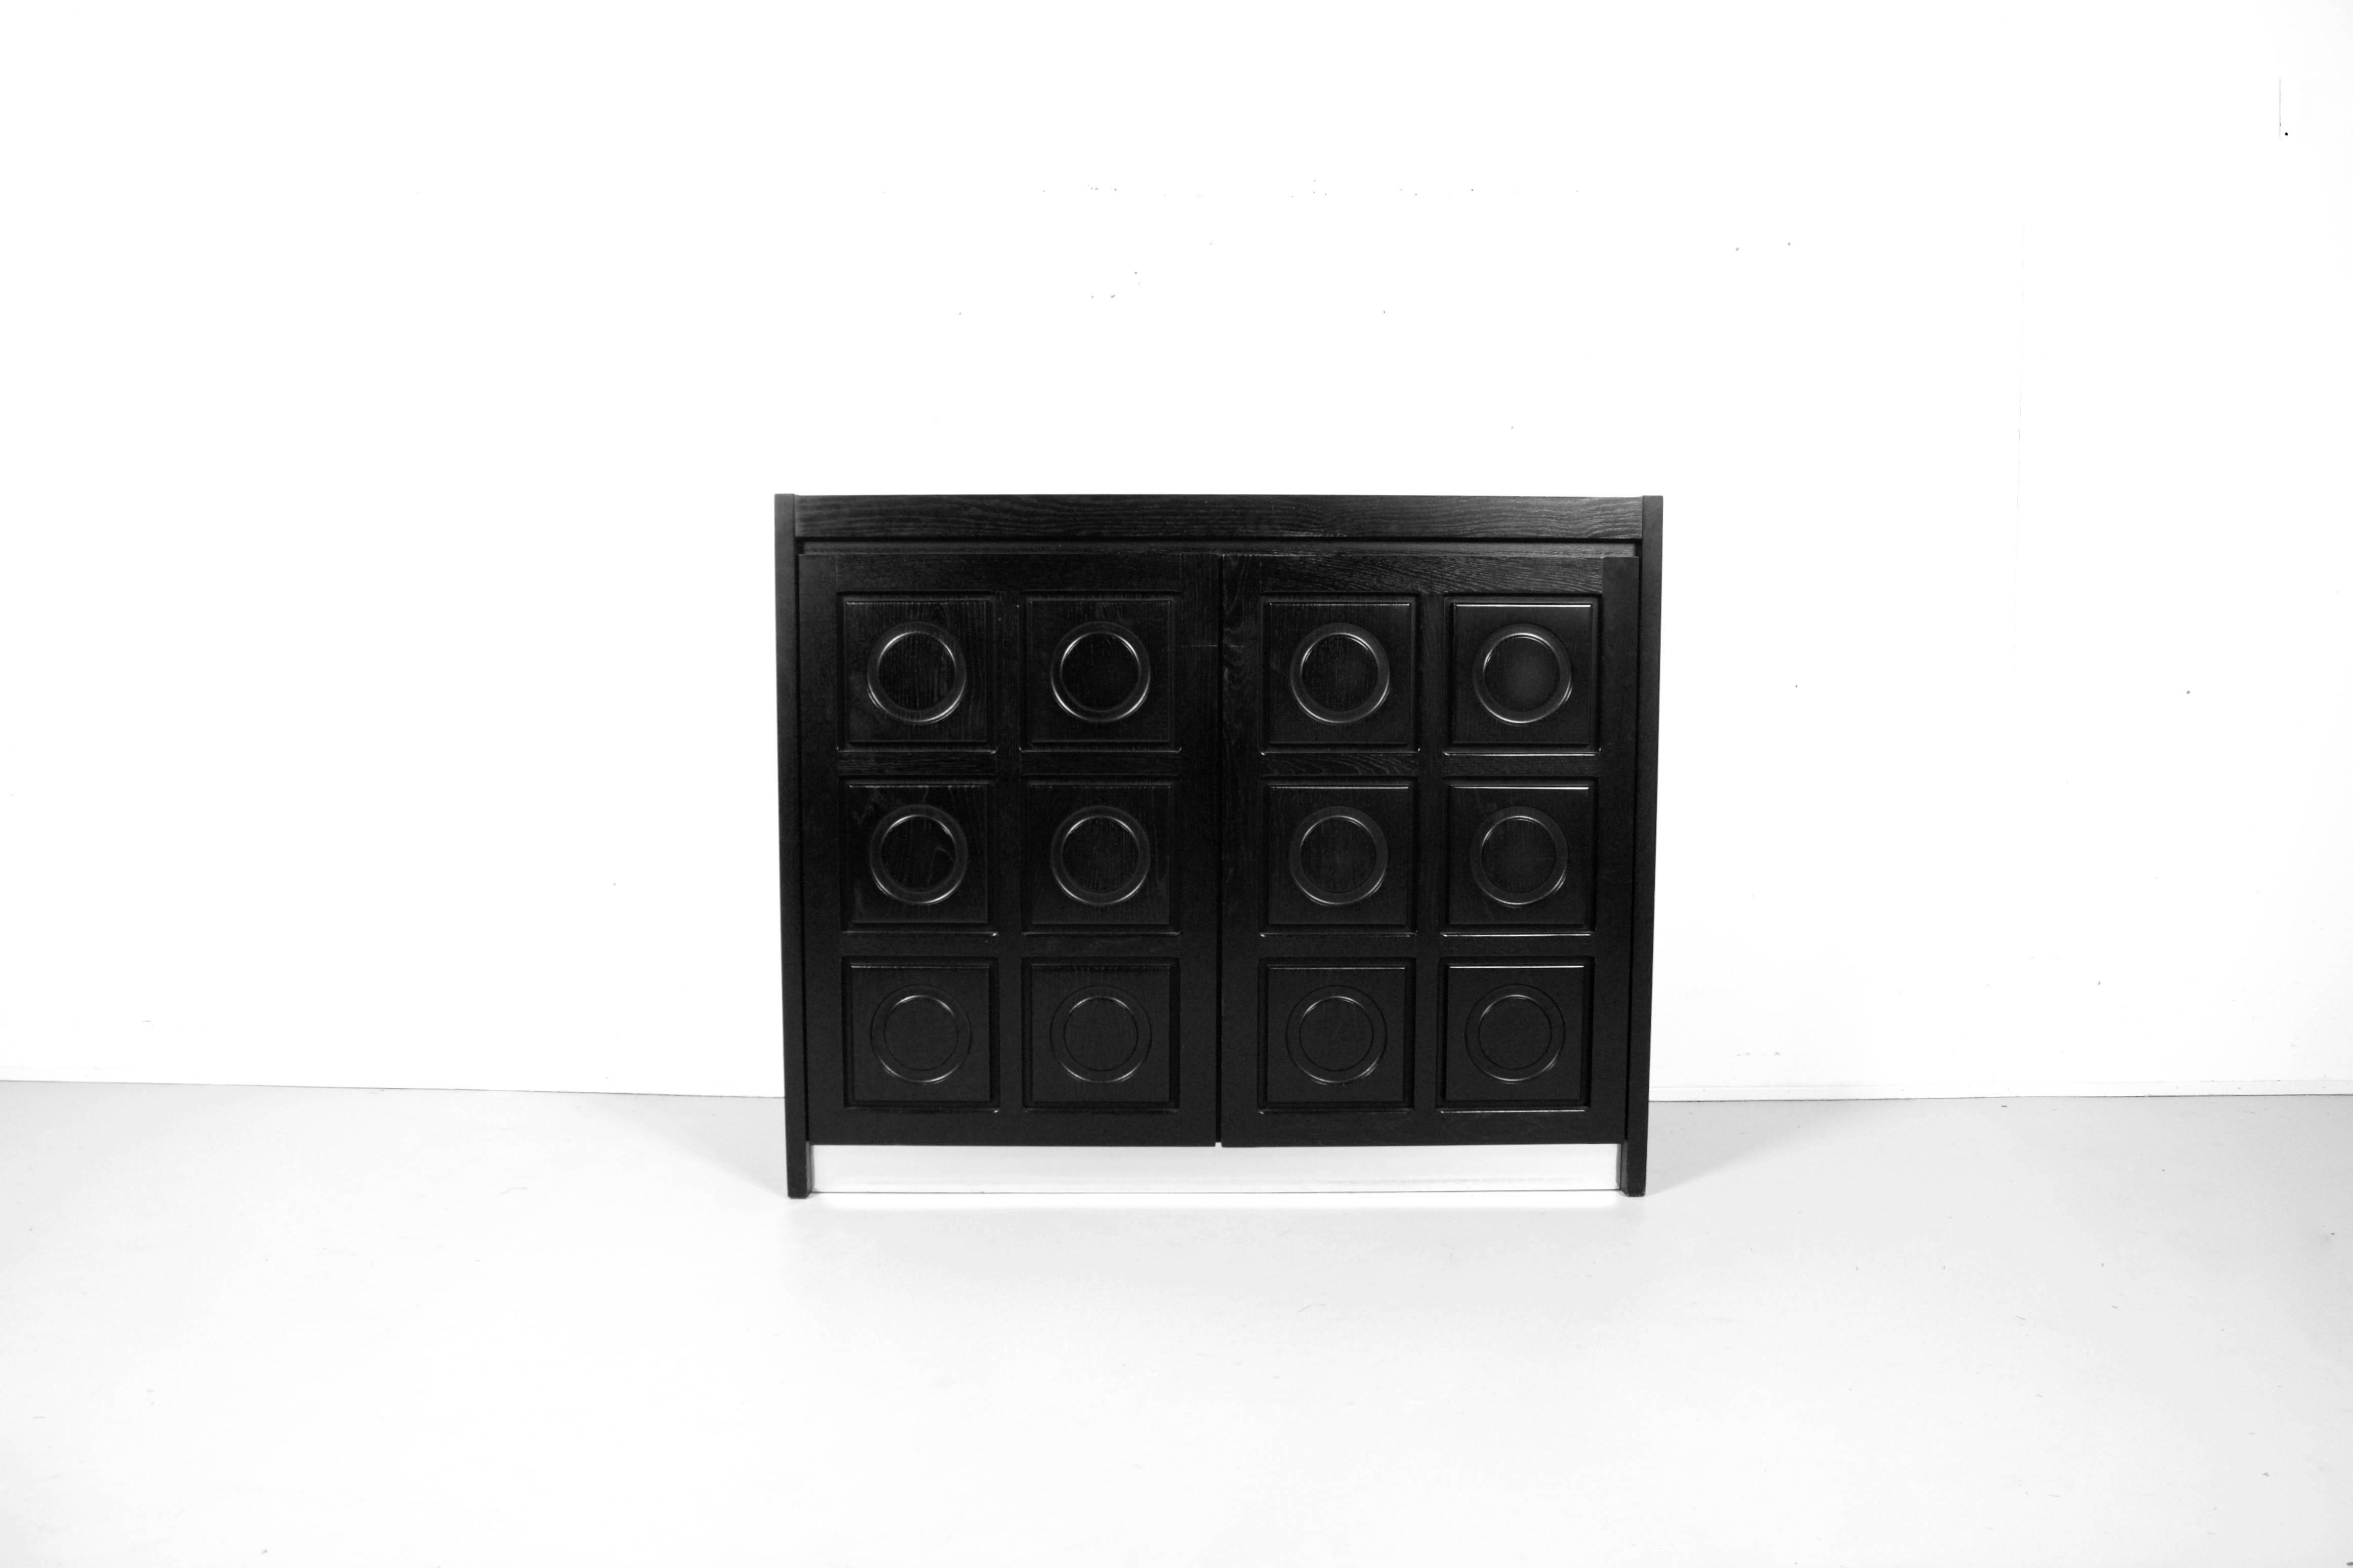 Belgium Brutalist credenza in very good condition

This sideboard has two doors made of massive black stained oak, each with a three-dimensional pattern of circles.

The sideboard is equipped with a aluminium strip on the base which gives a